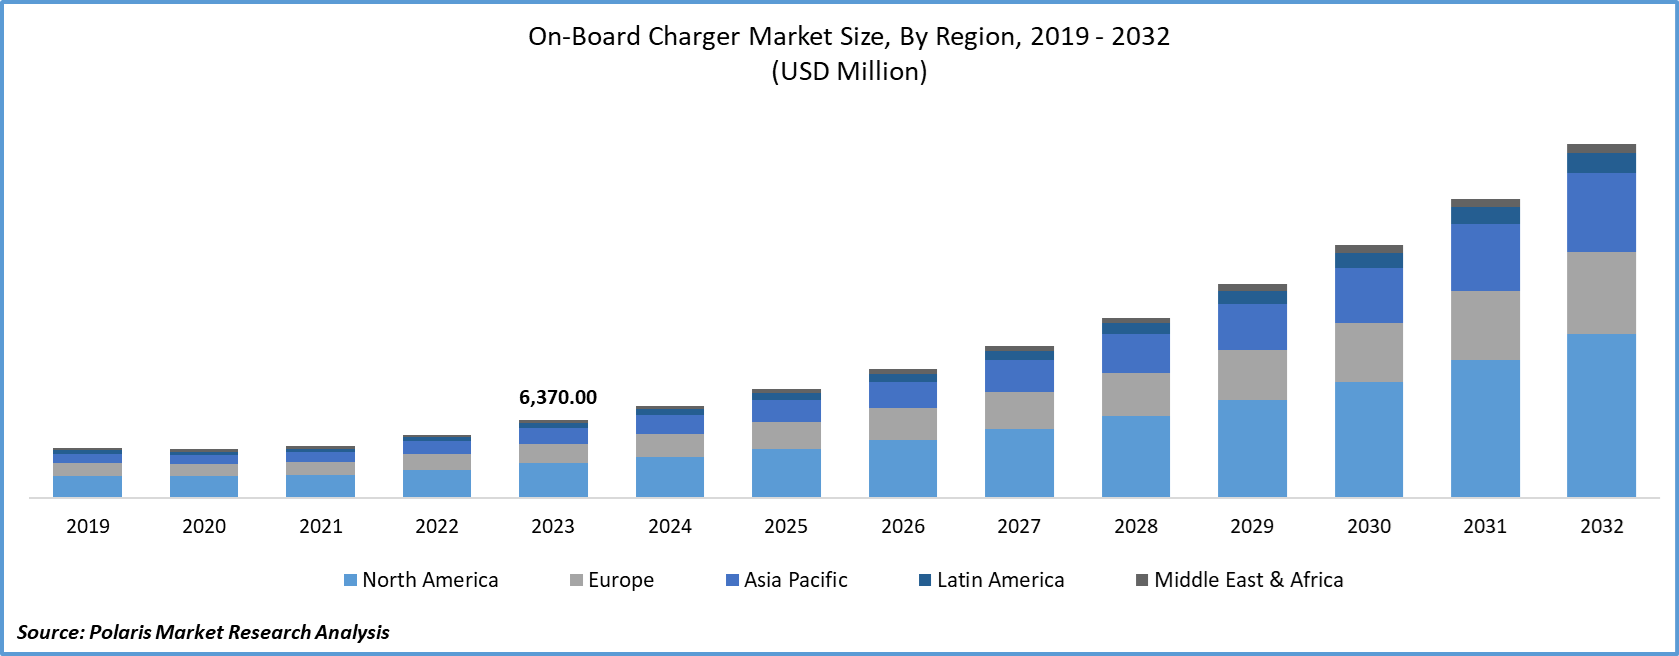 On-board Charger Market Size